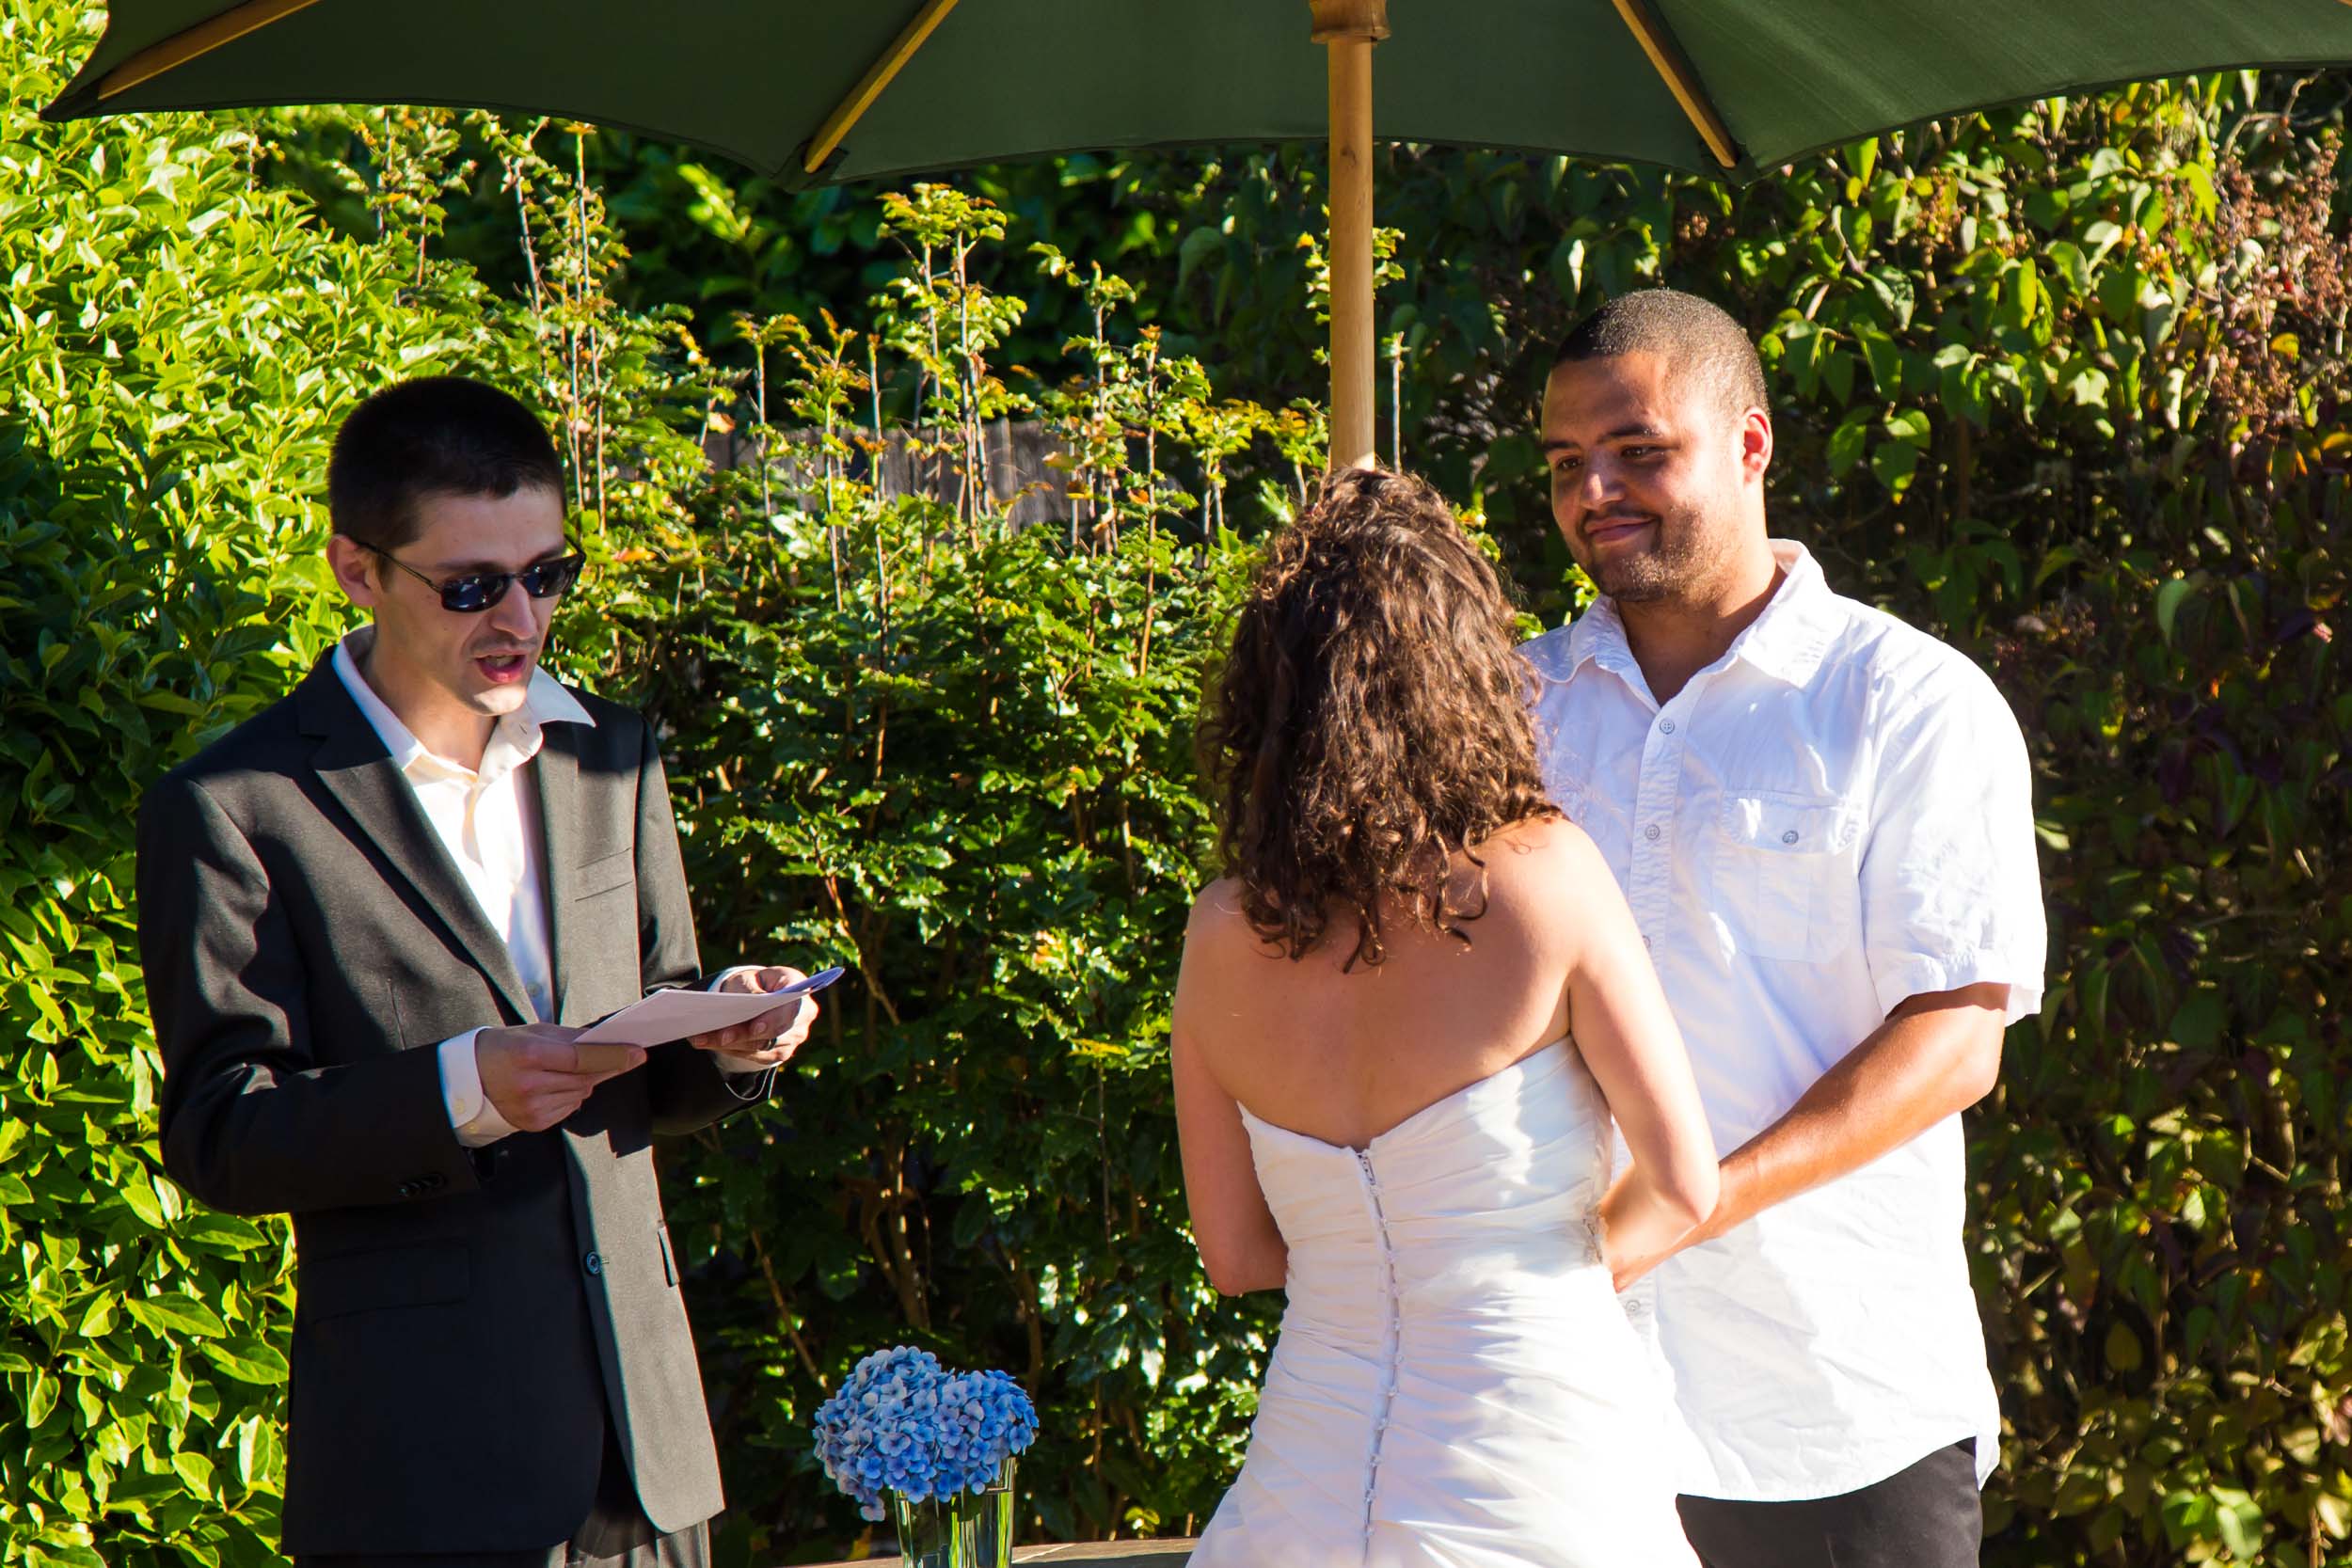 Seattle Wedding Photographer | By G. Lin Photography | Officiant reading to bride and groom